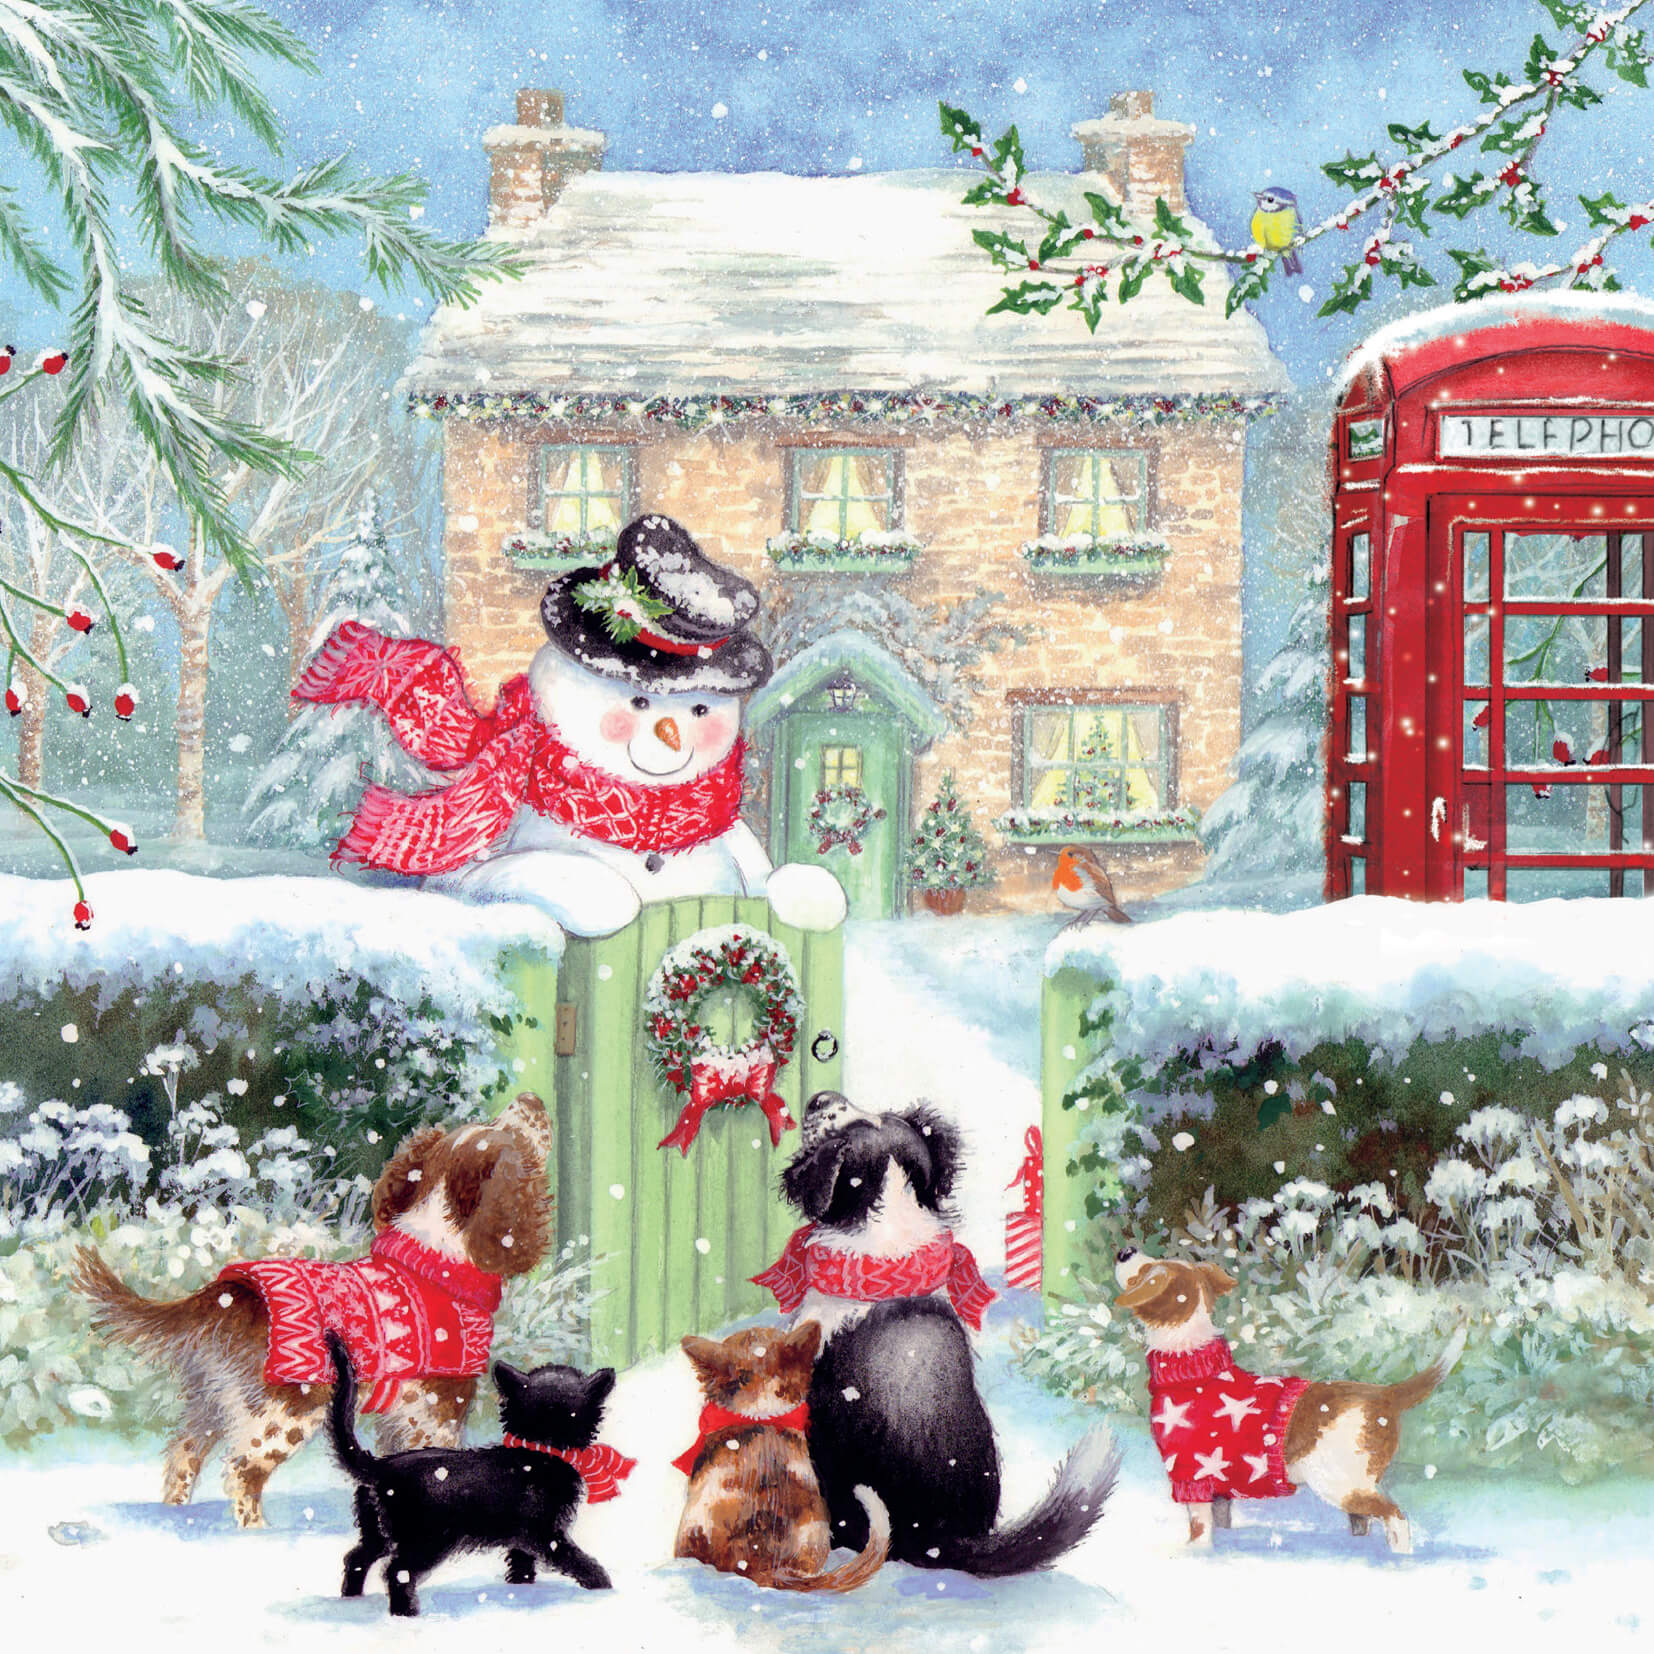 Christmas card showing a snowman with a red scarf opening a garden gate for dogs and cats with a red telephone box in the background